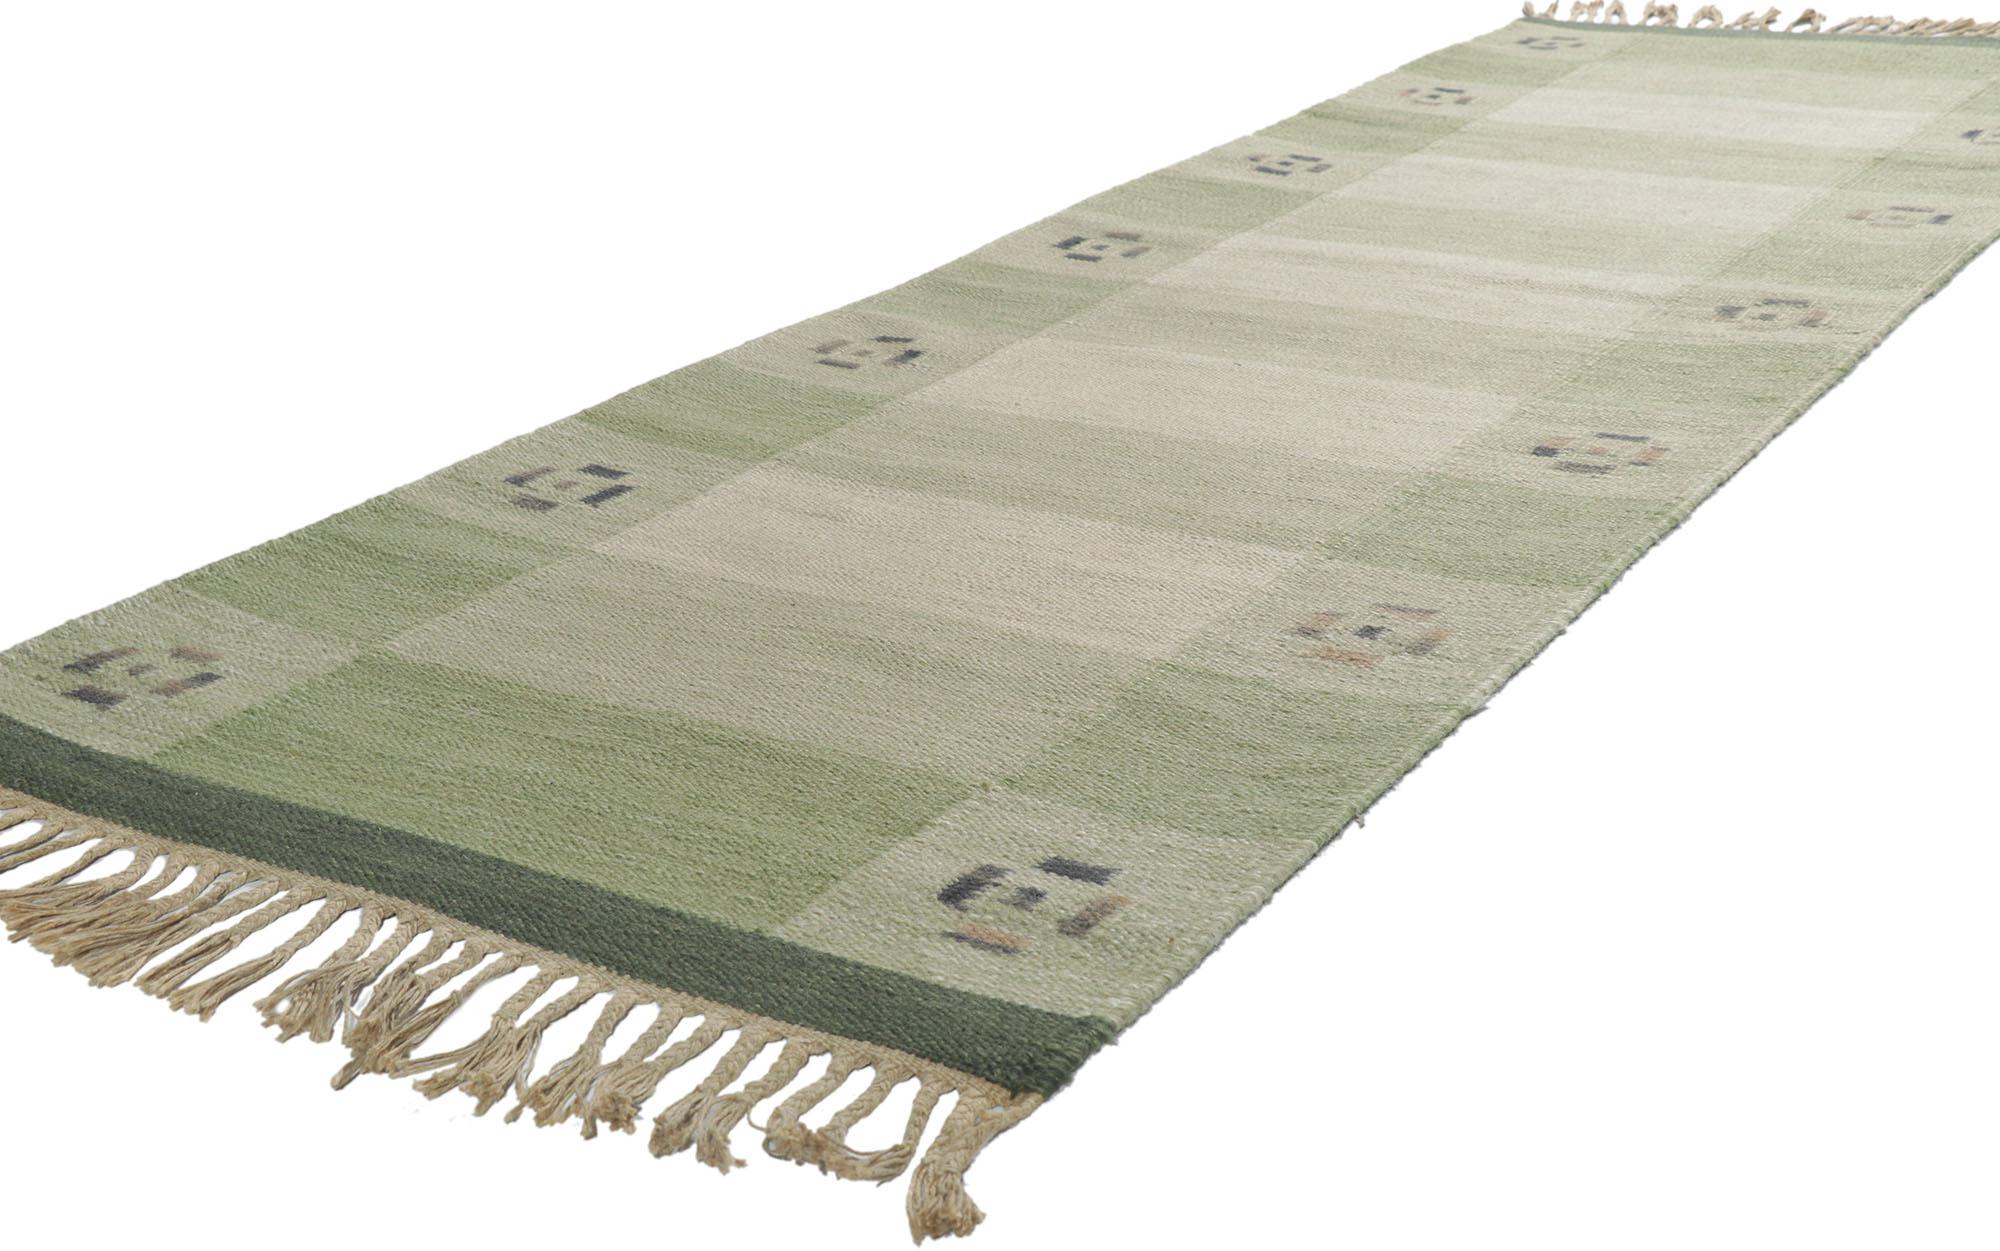 78261 Vintage Swedish Kilim Rollakan Runner with Scandinavian Modern Style 2'08 x 8'06. With its subtle geometric design and bohemian hygge vibes, this hand-woven wool Swedish Kilim rug beautifully embodies the simplicity of Scandinavian modern